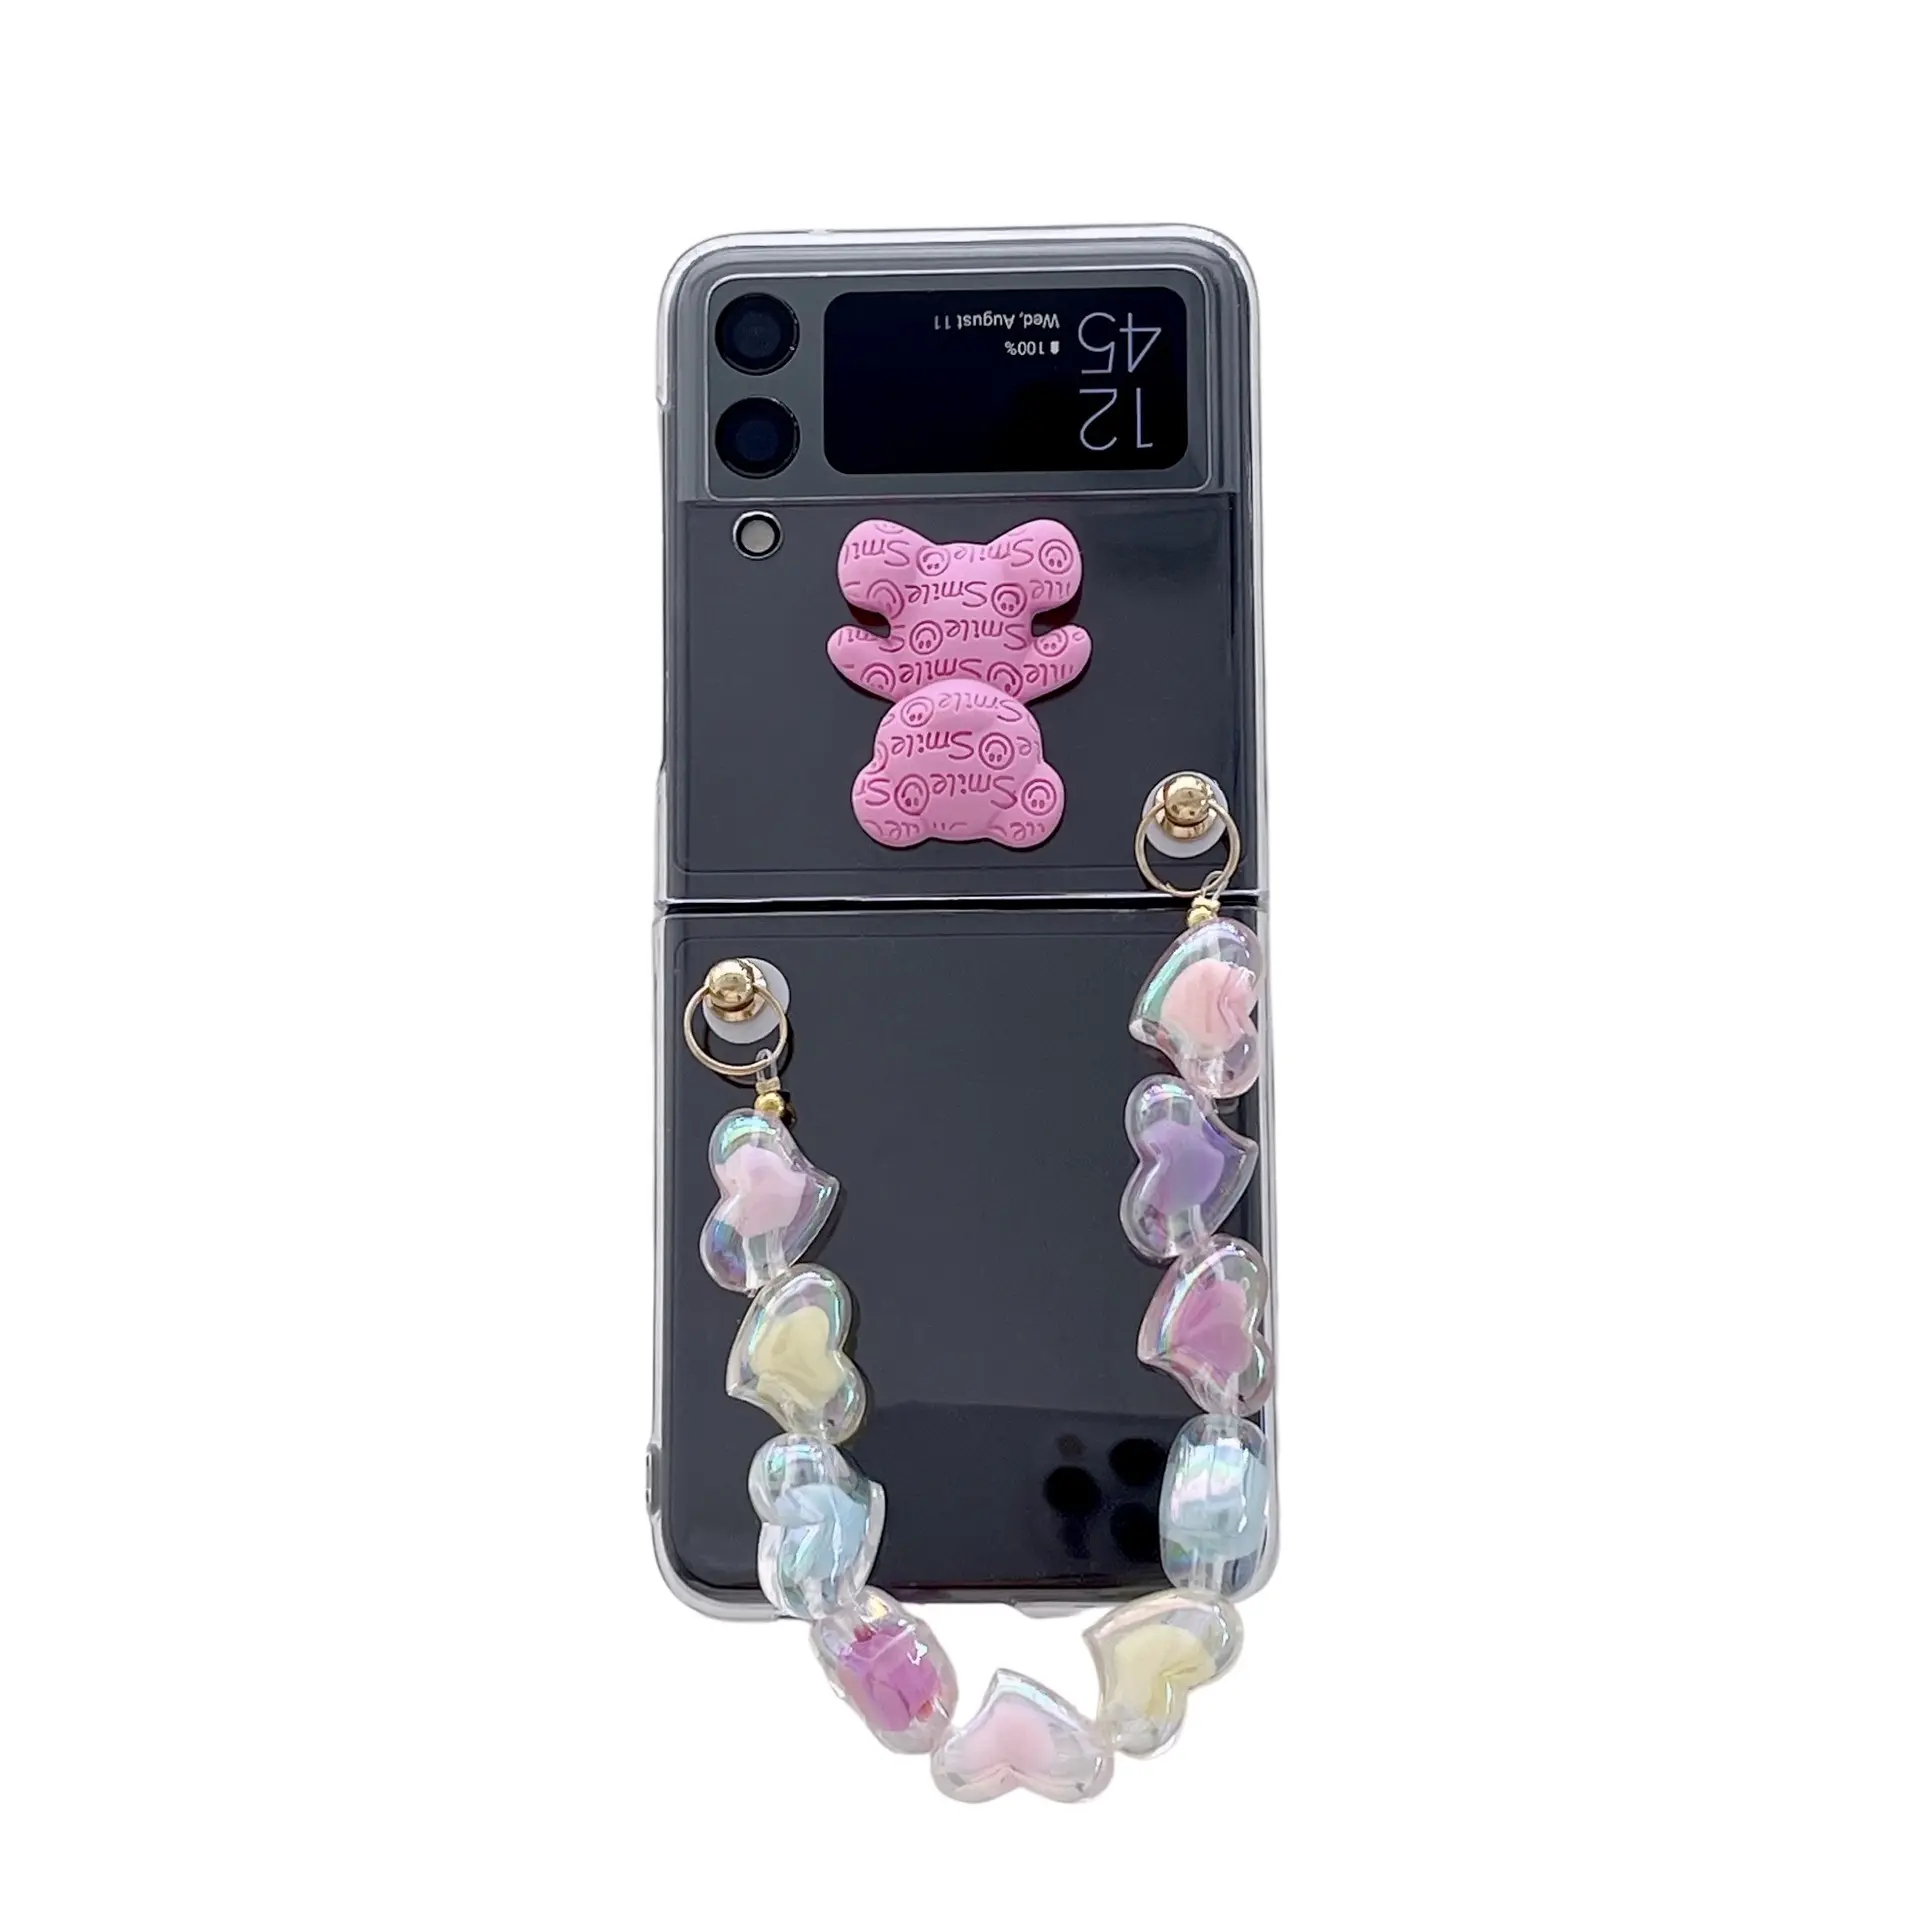 2022 For Samsung Z Flip 3 Cute Bear Transparent Mobile Phone Case With Lanyard Portable Love Heart Chain Bracelet Folding Cover